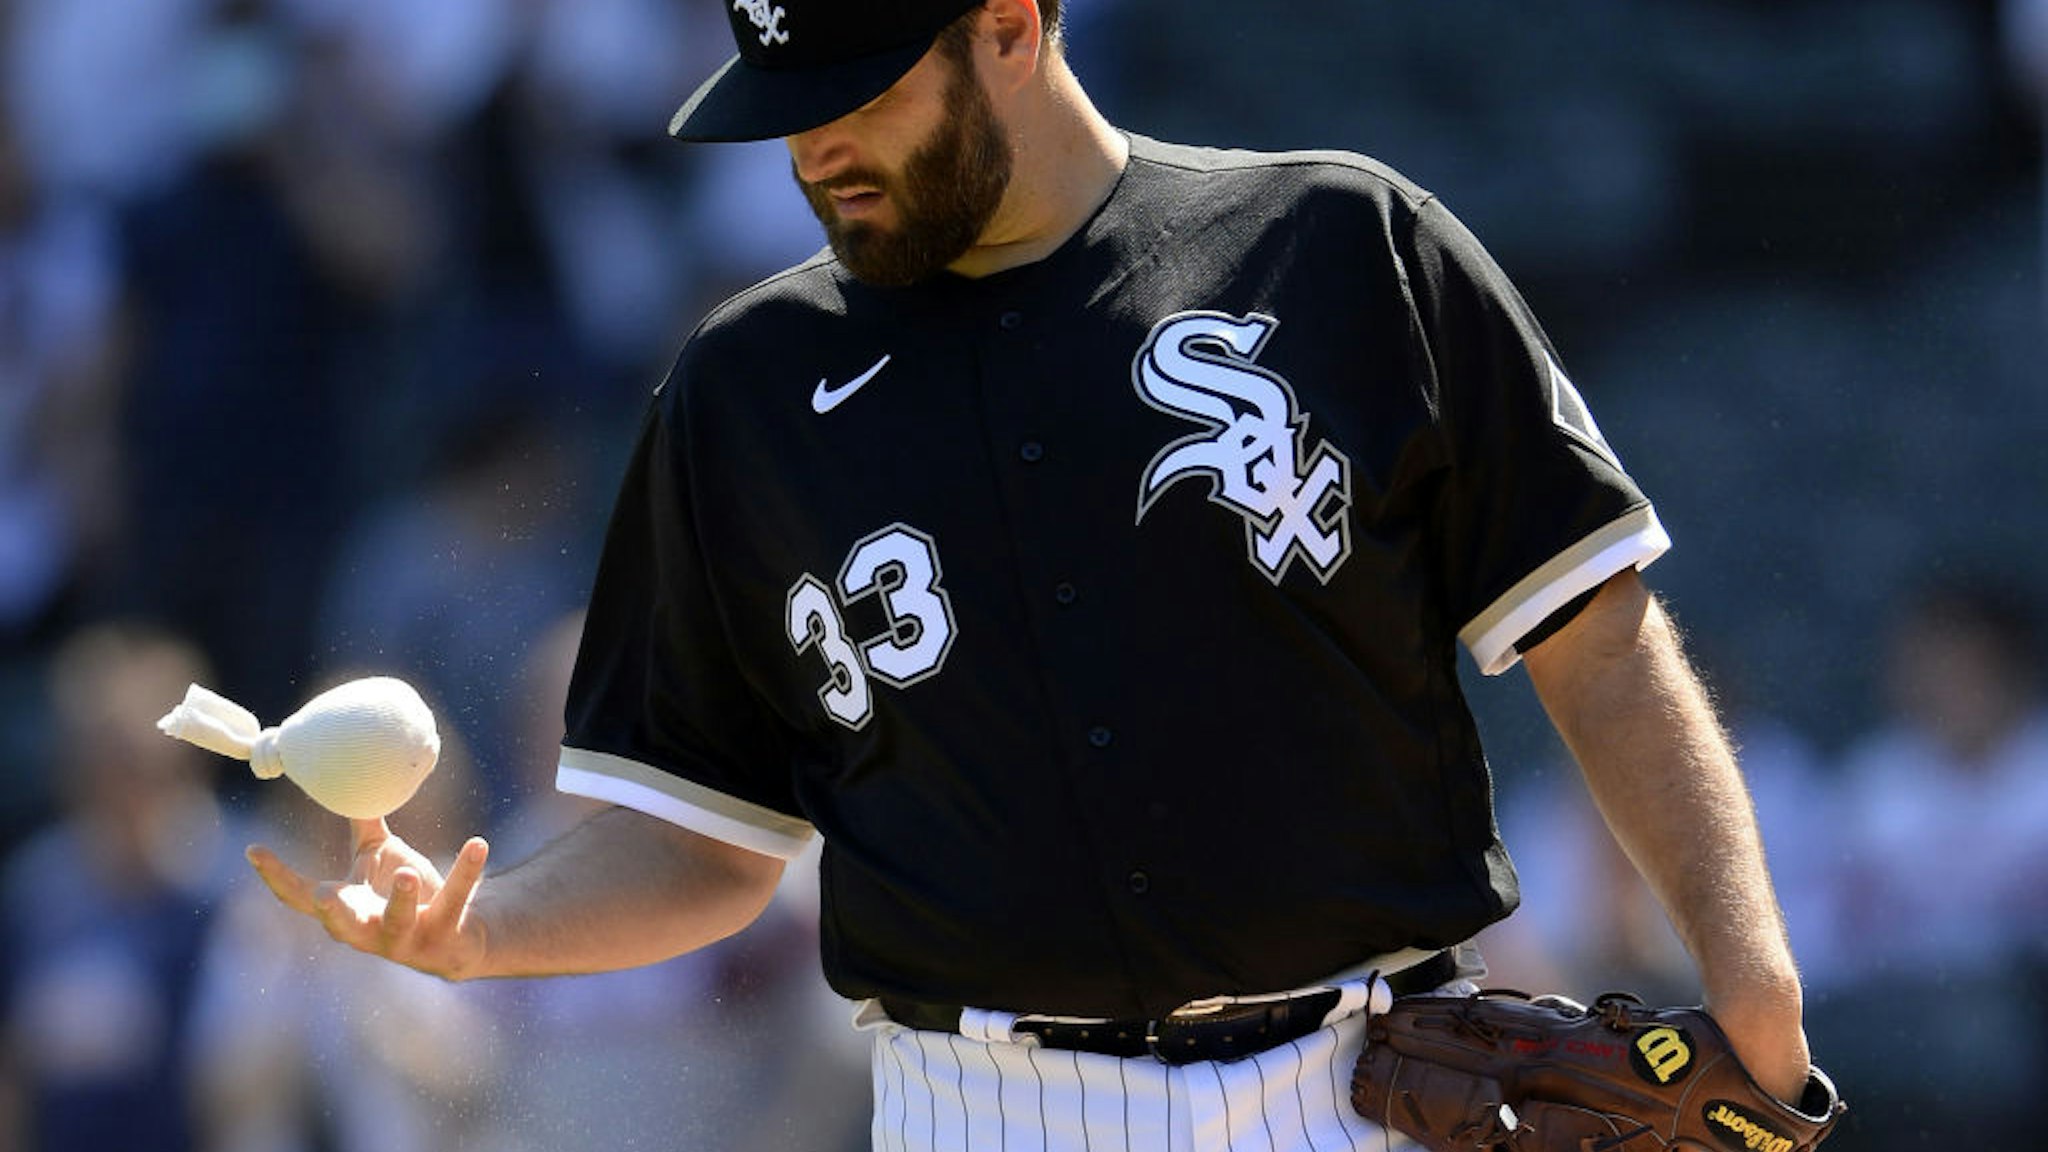 CHICAGO - MAY 01: Lance Lynn #33 of the Chicago White Sox uses the rosin bag while pitching against the Cleveland Indians on May 1, 2021 at Guaranteed Rate Field in Chicago, Illinois. (Photo by Ron Vesely/Getty Images)